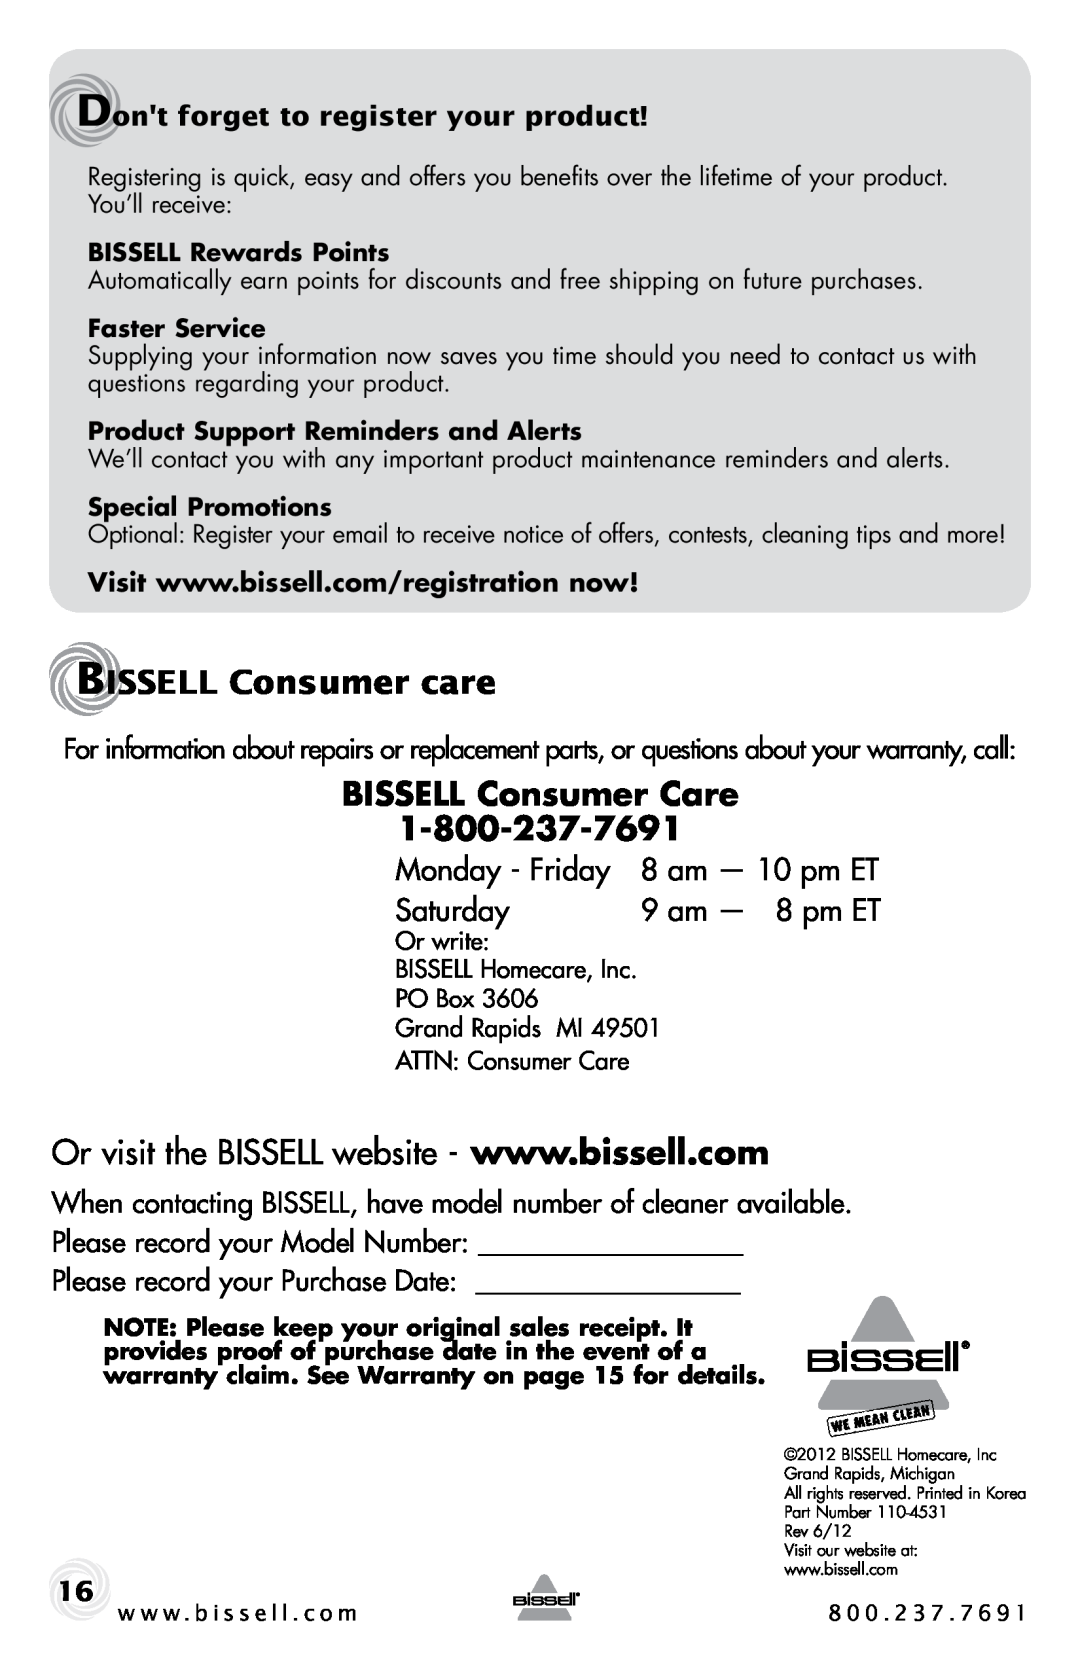 Bissell 6221 BISSELL Consumer care, BISSELL Consumer Care, Dont forget to register your product, Monday - Friday, Saturday 